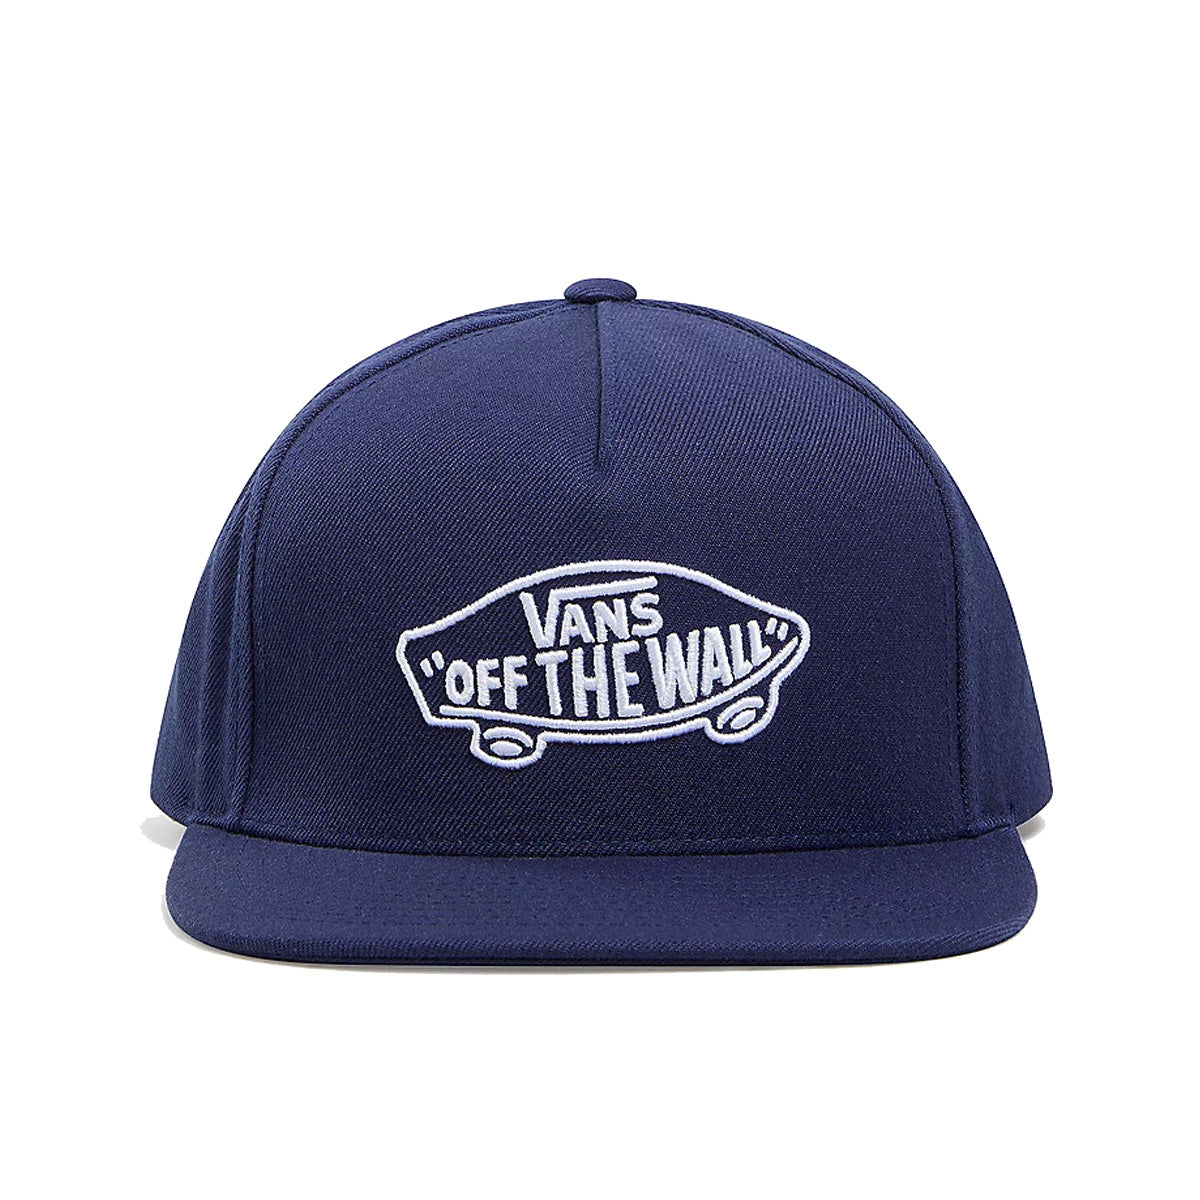 Navy blue vans six panel cap with white vans “off the wall” logo on front and adjustable strap on back. Free uk shipping over £50